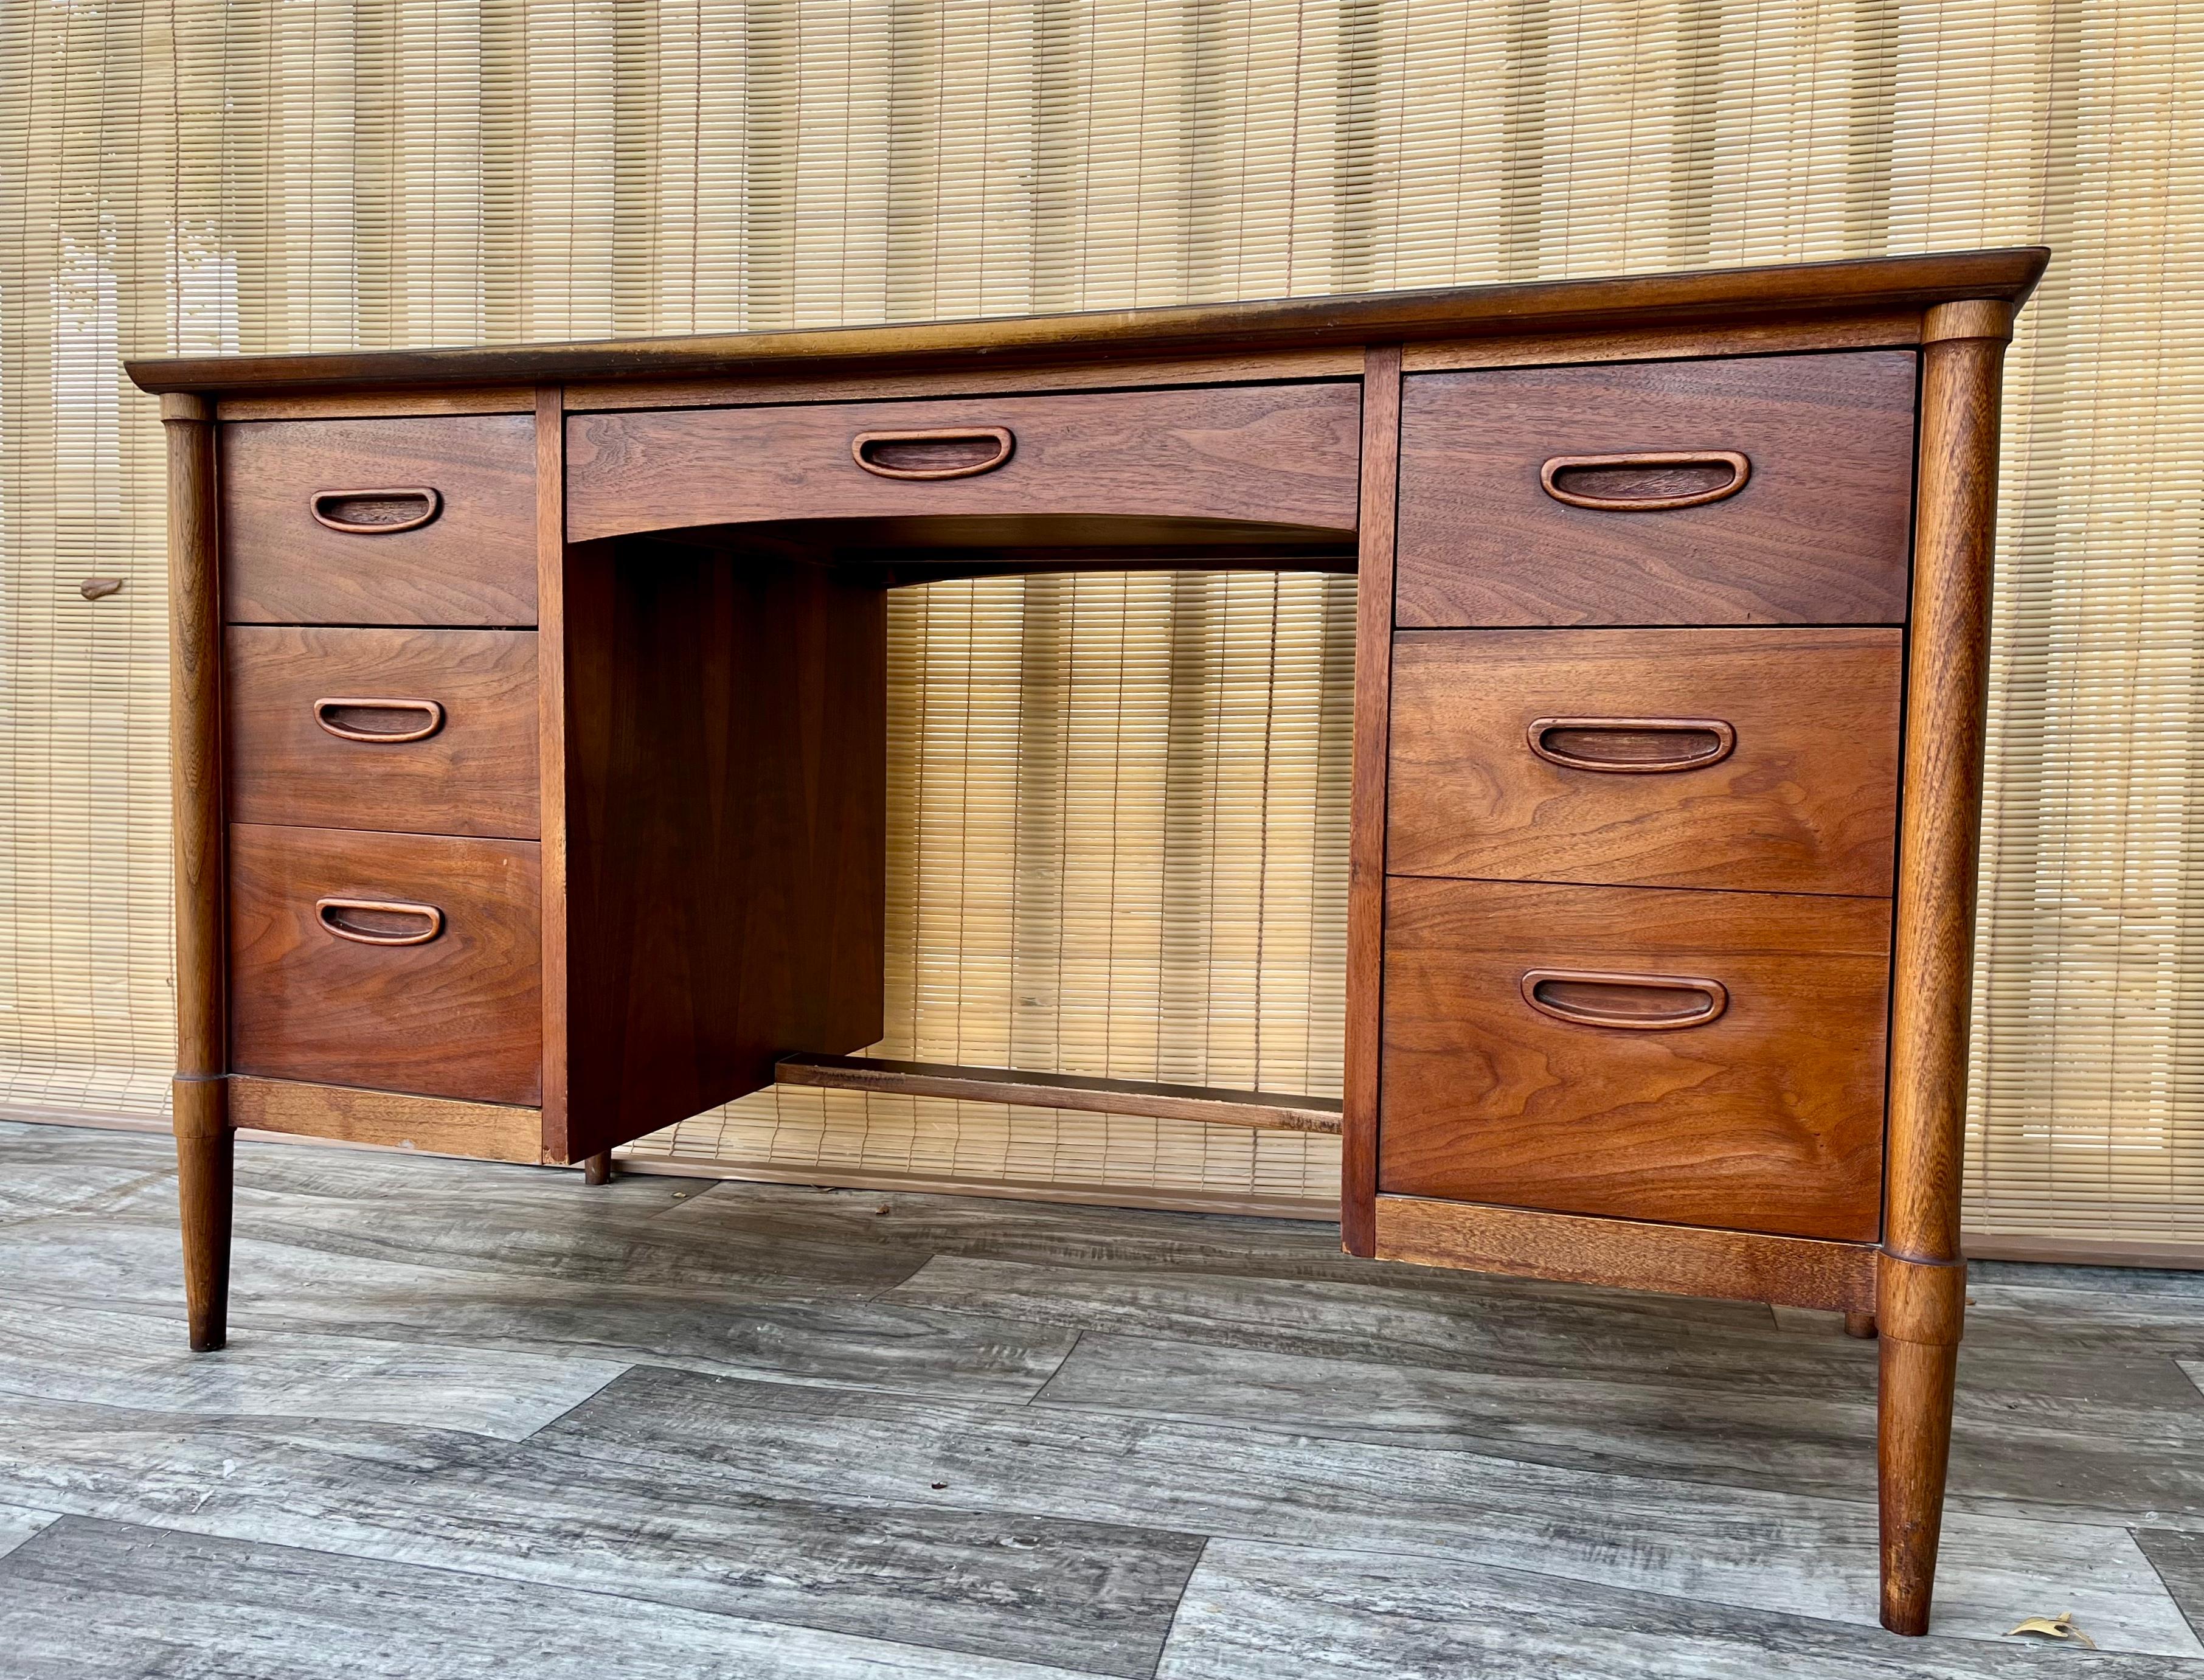 Vintage Mid Century Modern Double-Sided Desk by Lane Furniture. Circa. 1960s 
Features a beautiful walnut wood grain, a quintessential Mid Century Modern Design, a faux woodgrain laminated top, and six drawers with sculpted hand pulls for plenty of